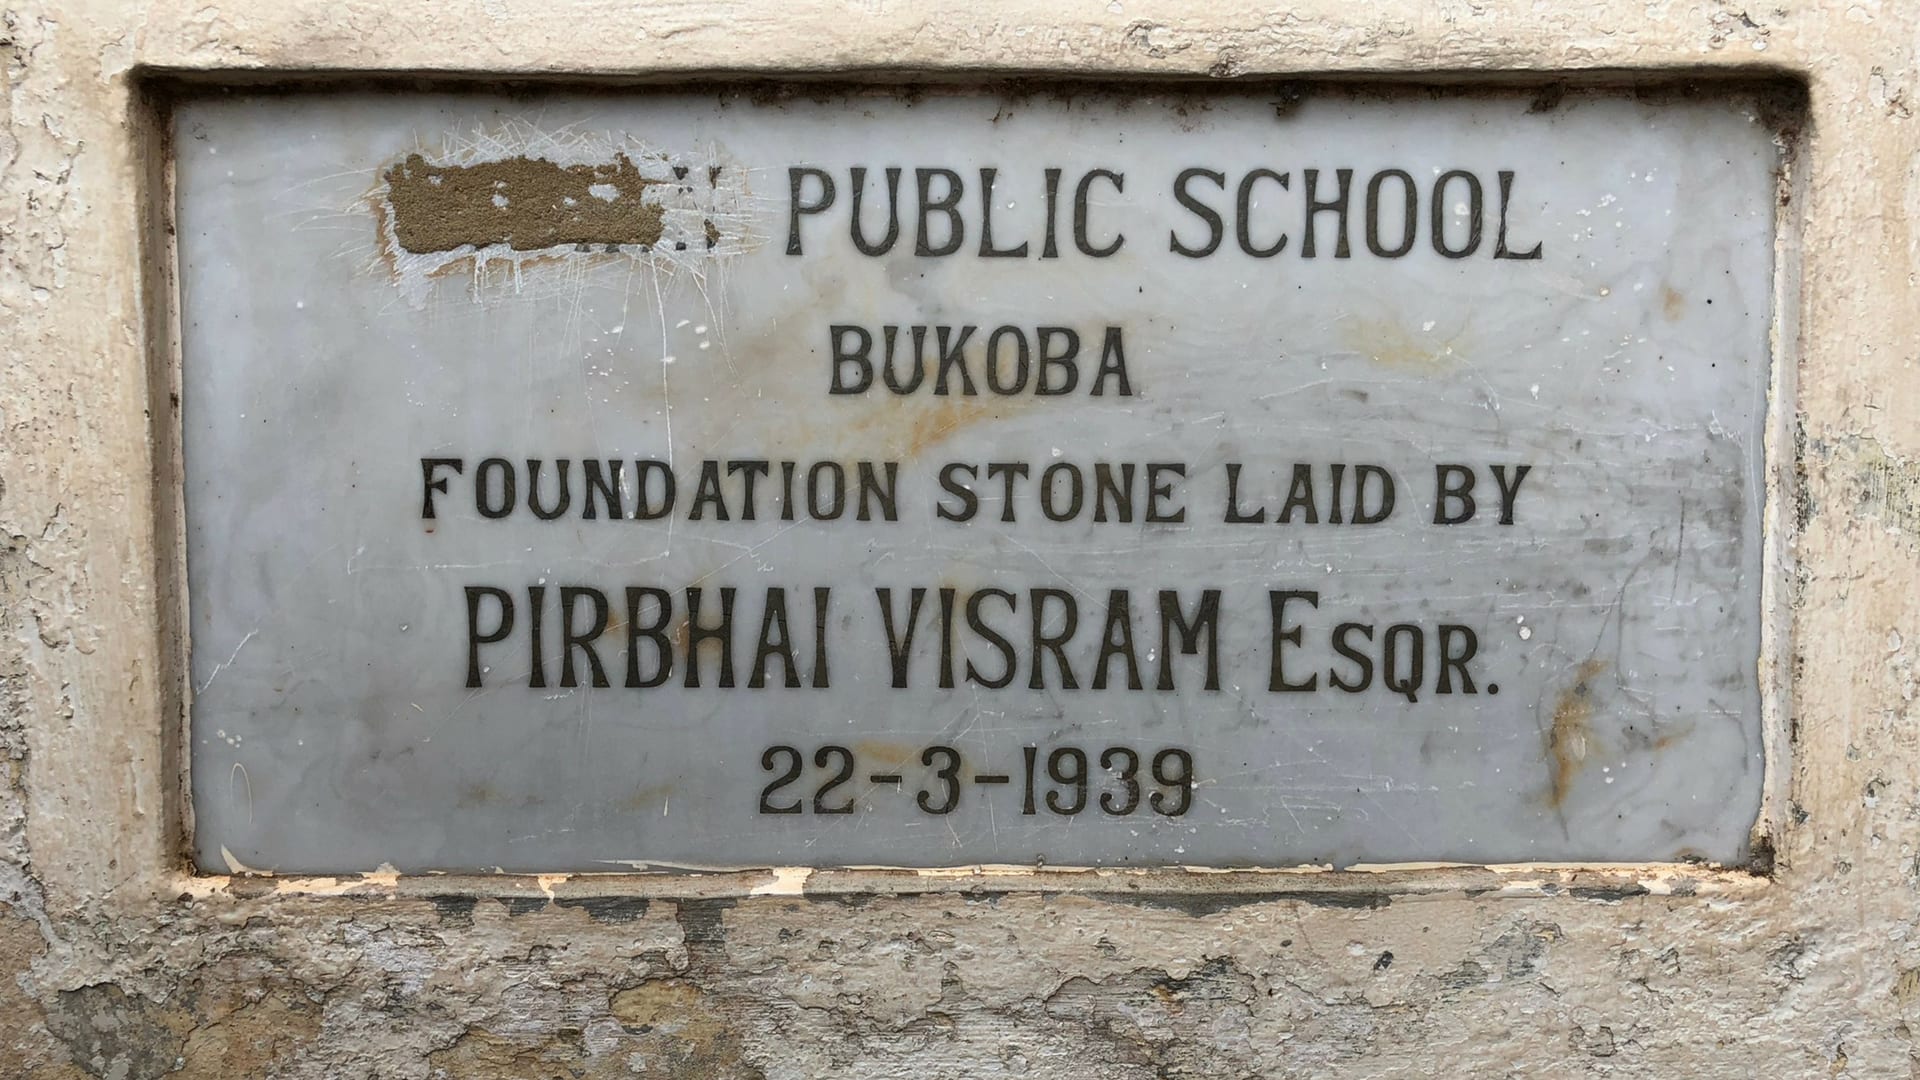 A plaque with foundation stone of Bukoba School